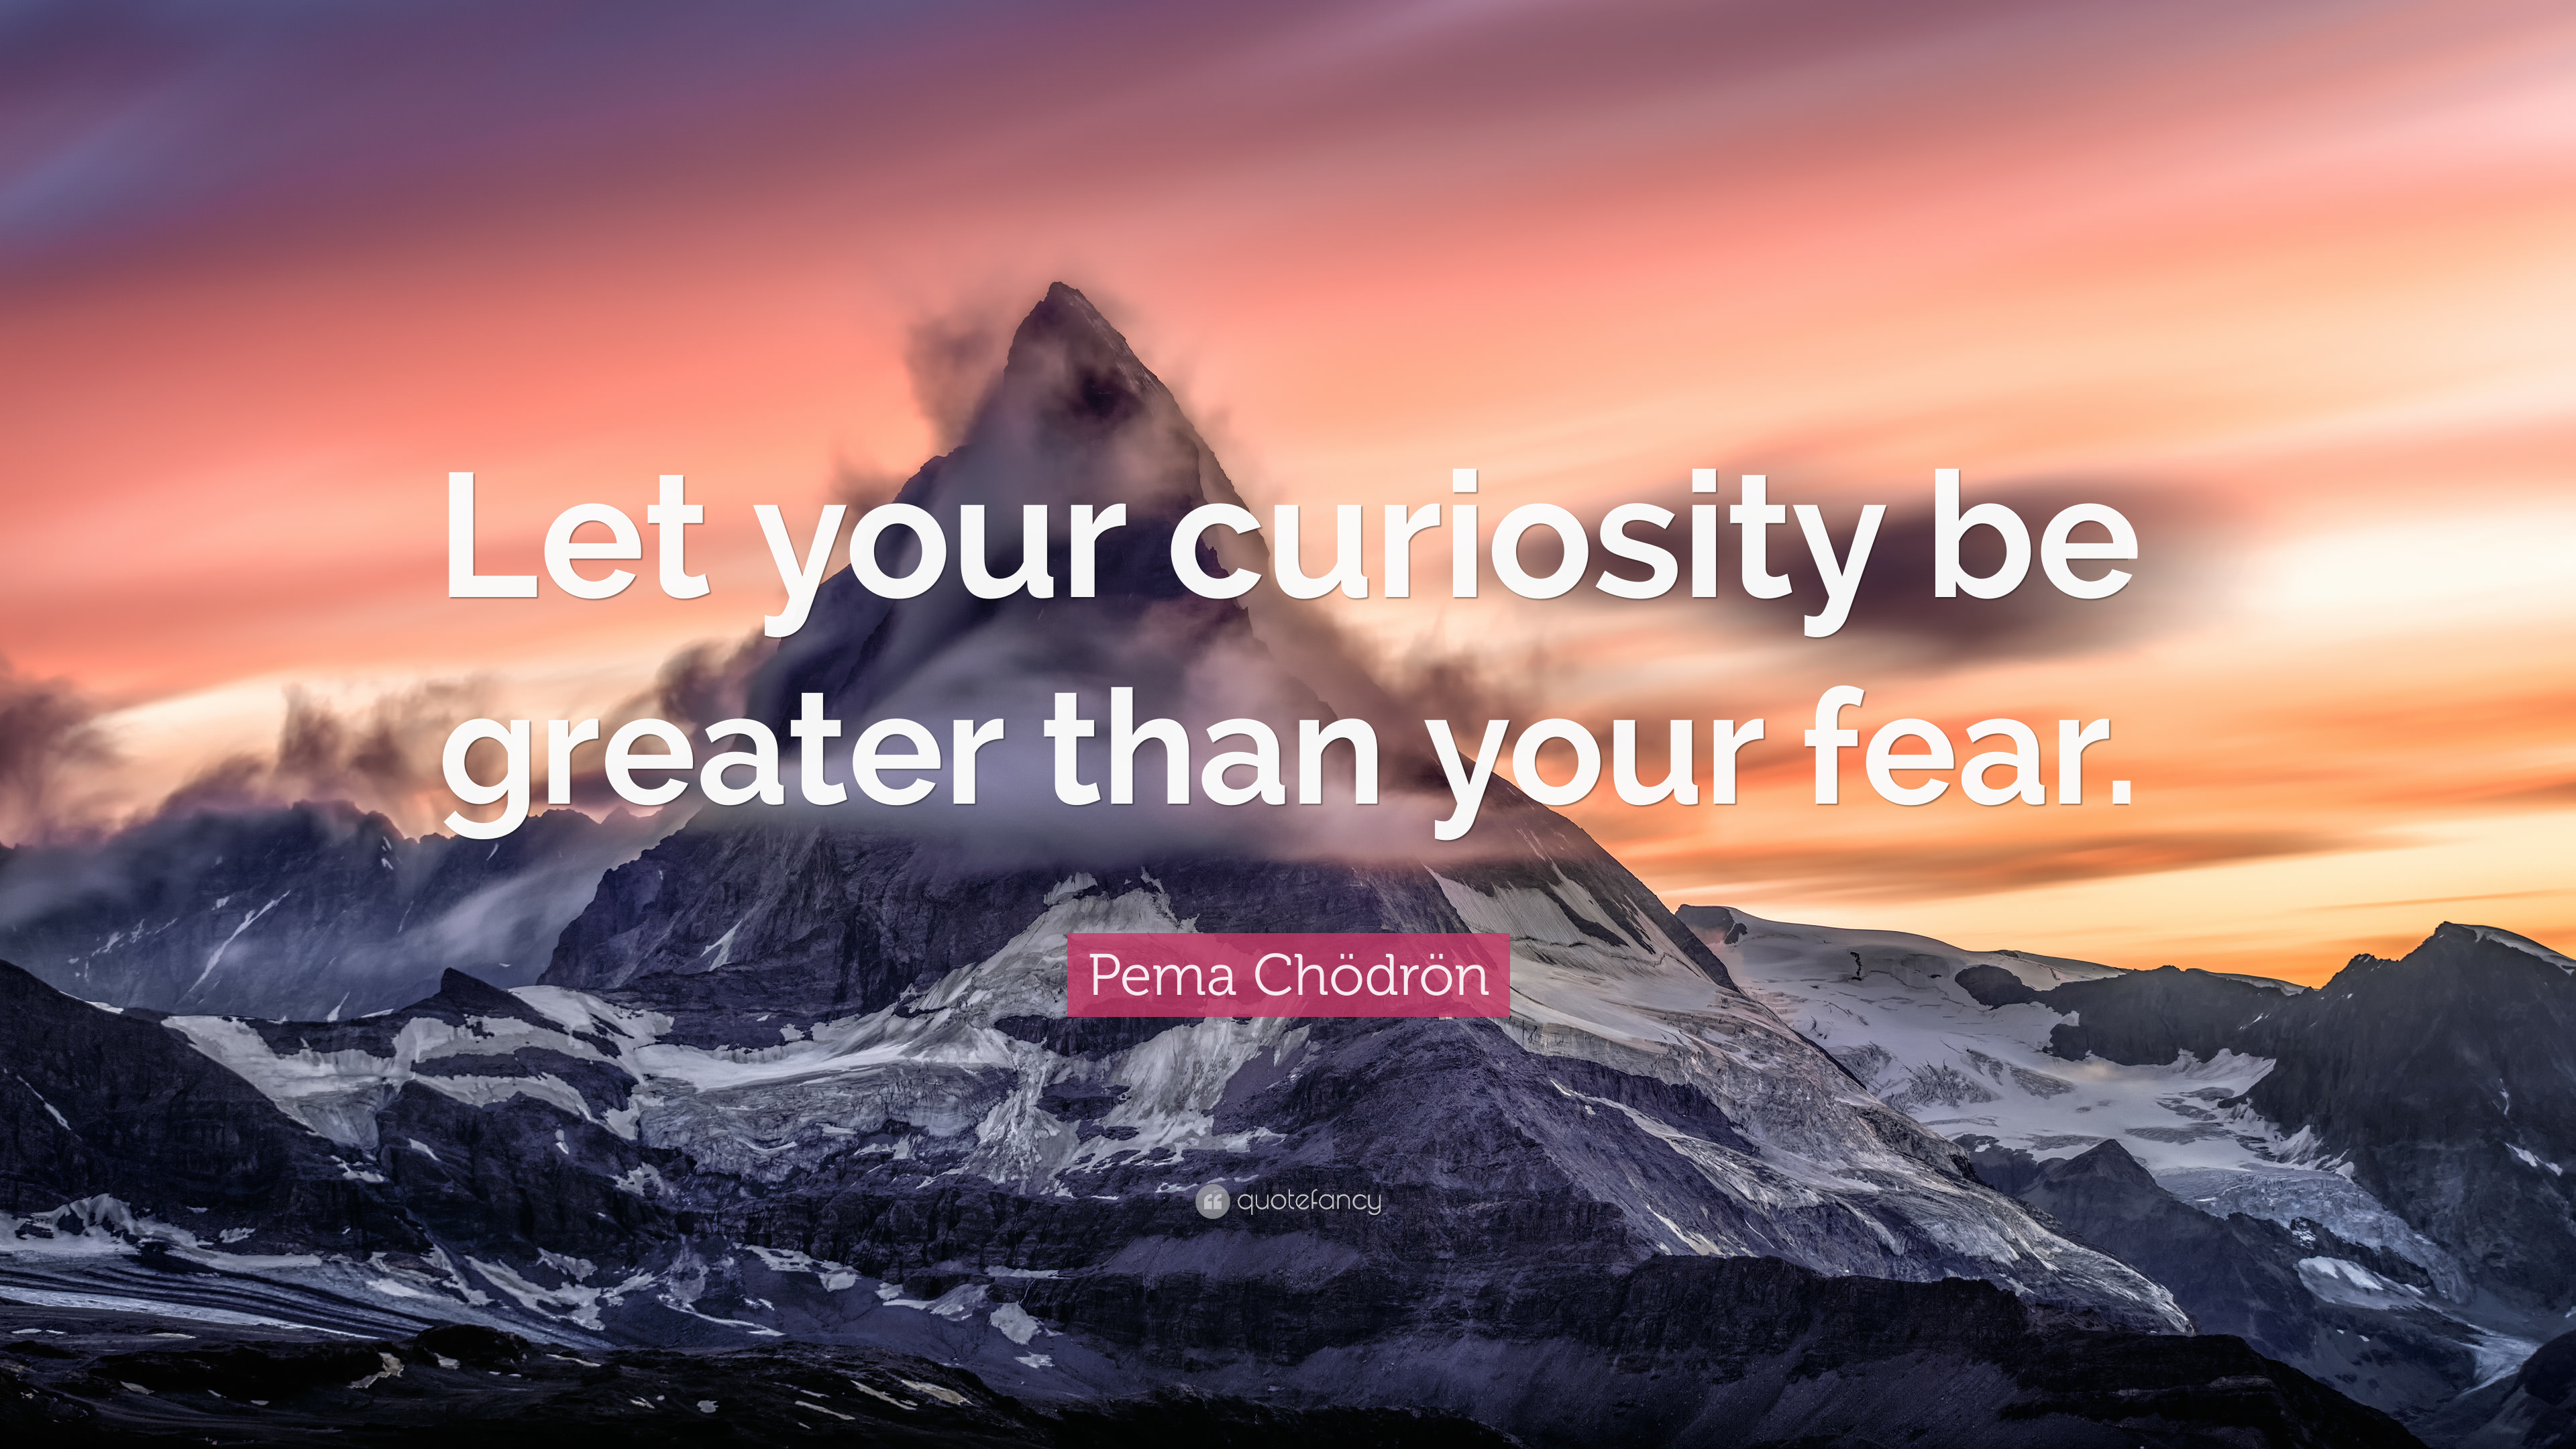 Pema Chödrön Quote: “Let your curiosity be greater than your fear